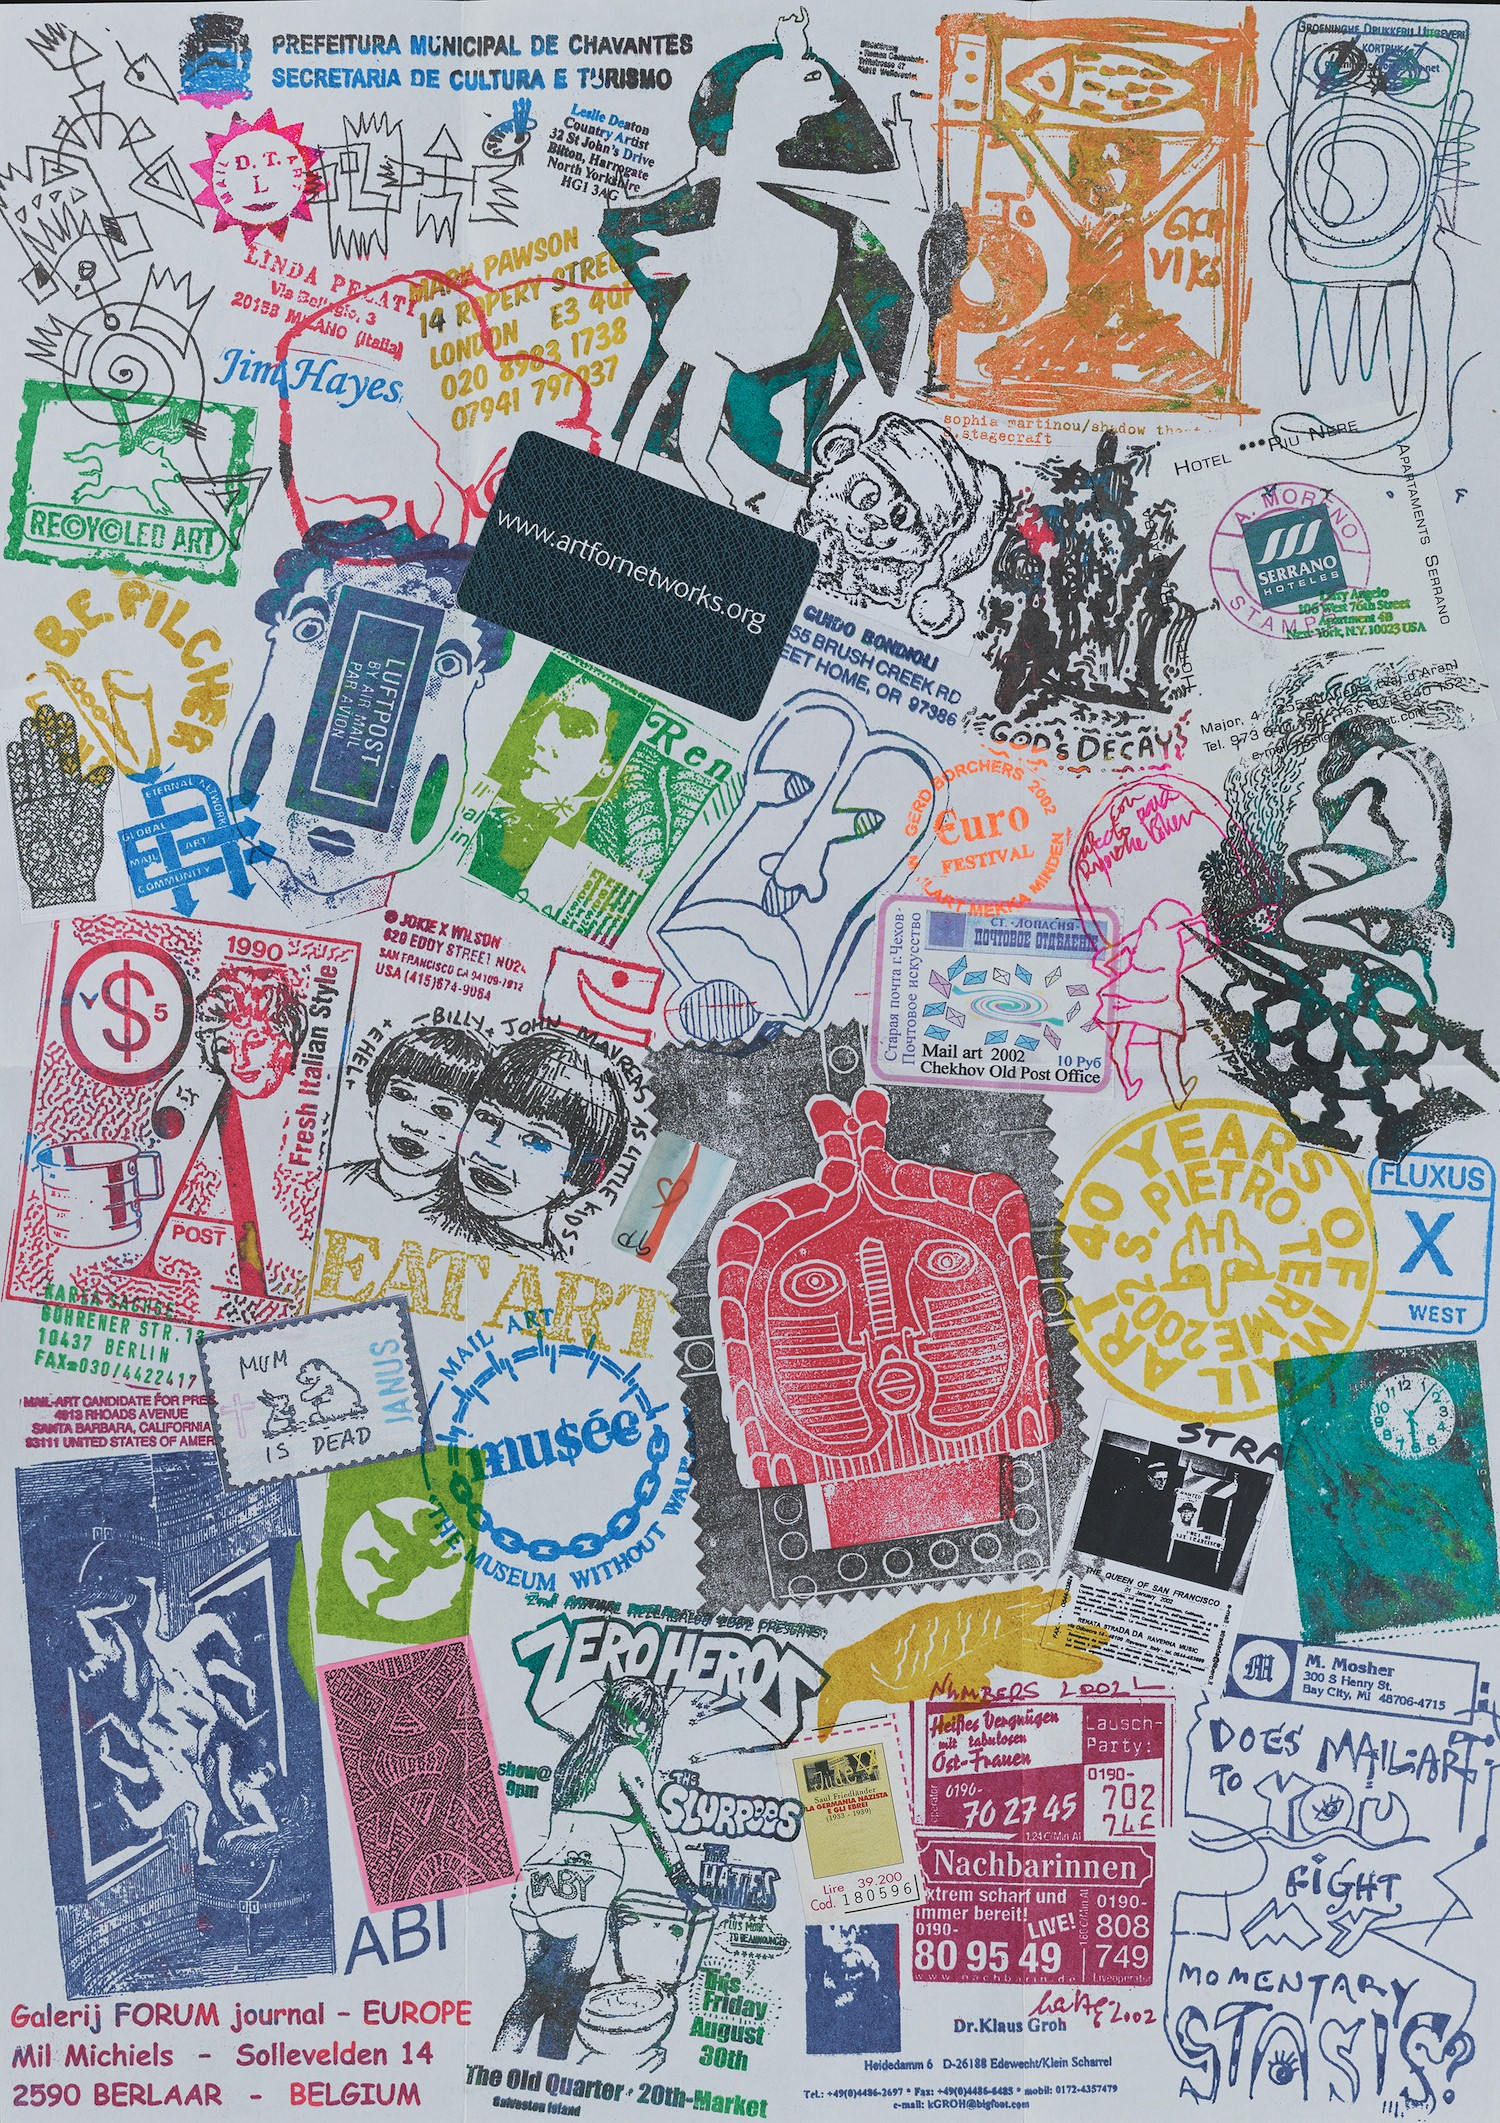 Ryosuke Cohen mail art to John Evans, 2002 (ongoing project since 1985). John Evans papers, Archives of American Art, Smithsonian Institution. - John Evans papers, Archives of American Art, Smithsonian Institution.